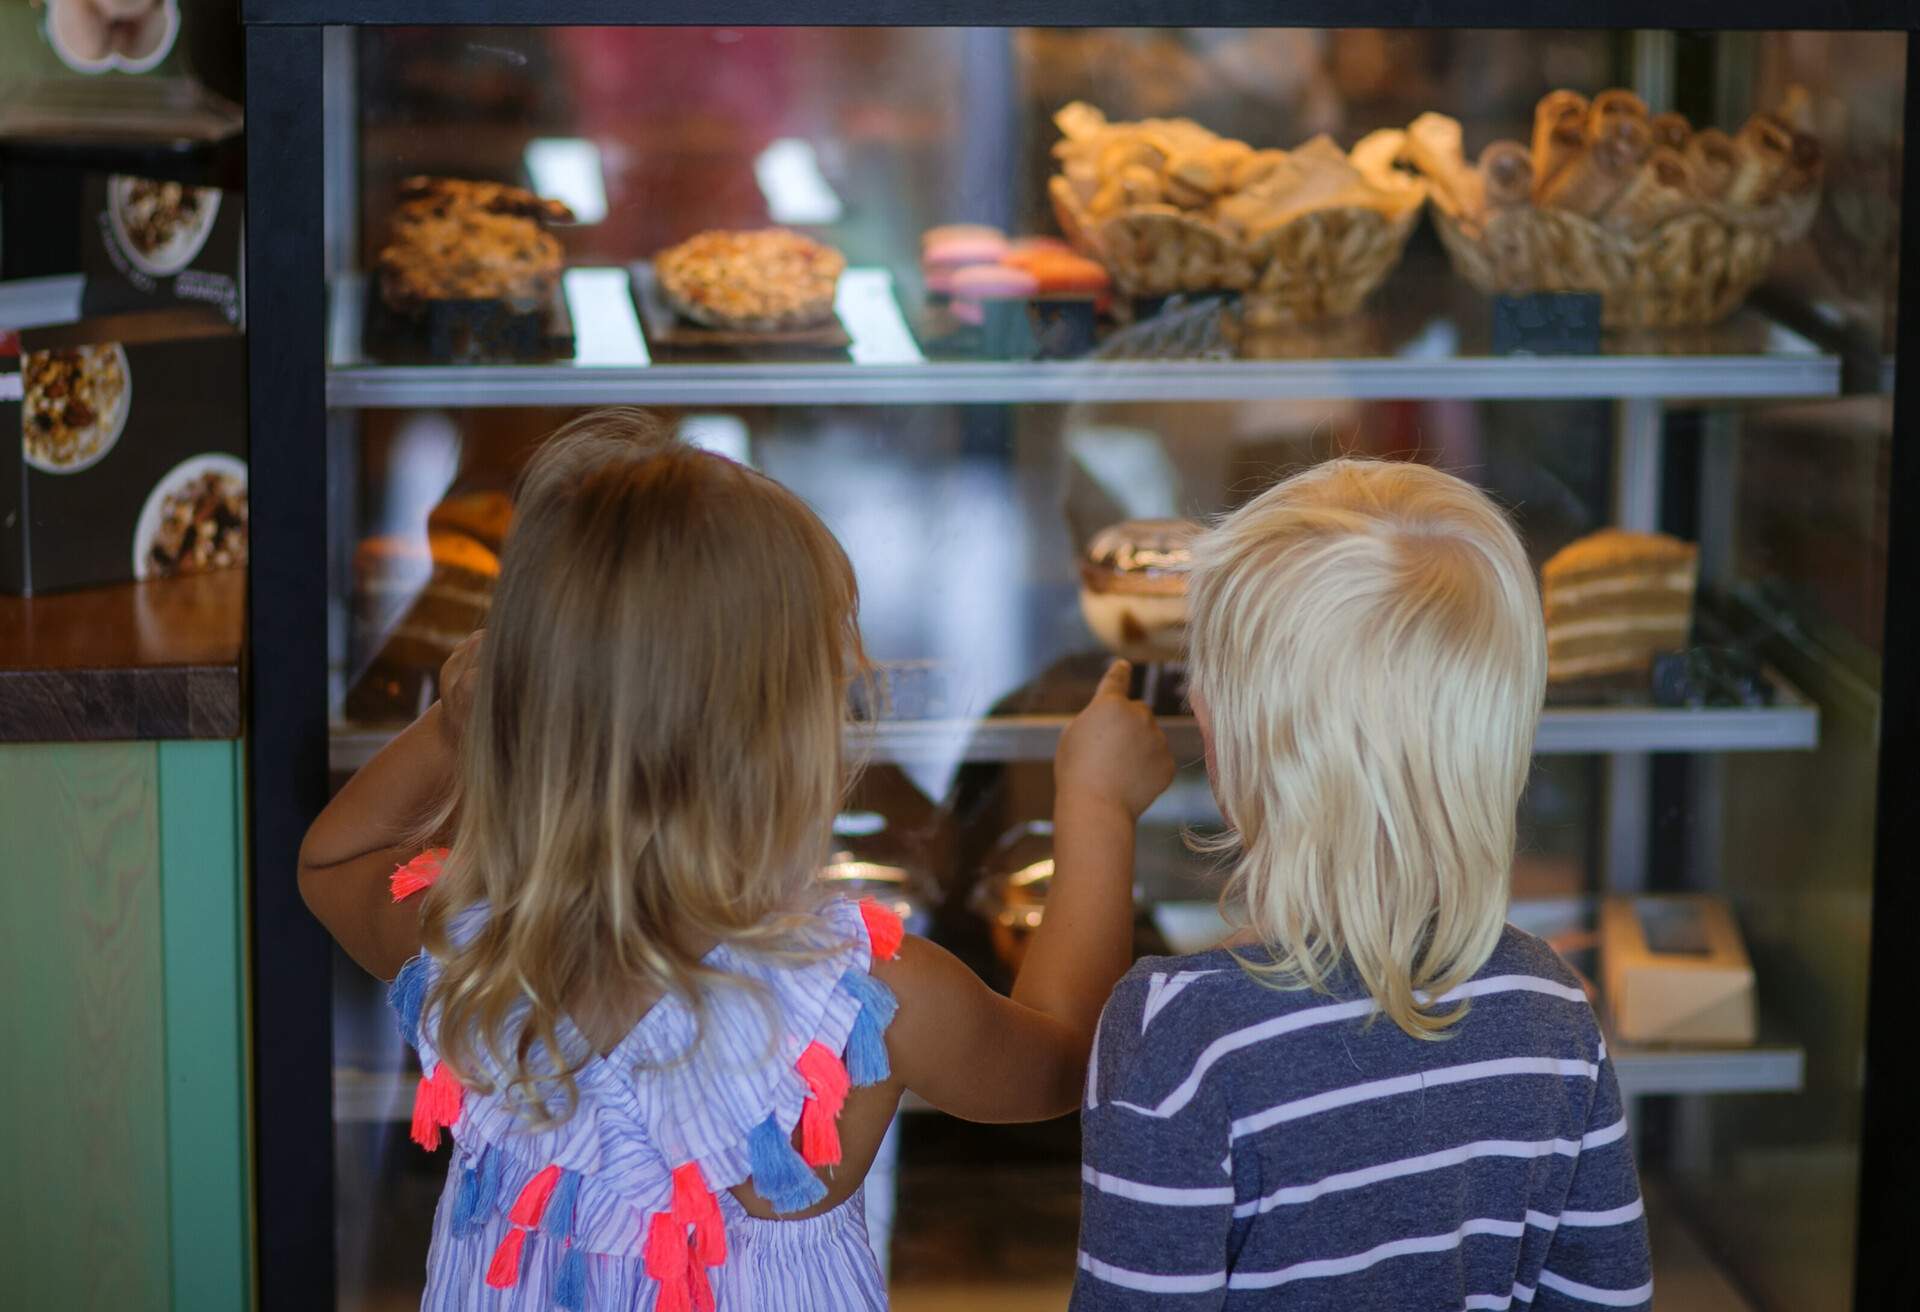 boy and girl in a cafe in front of a shop window are choosing a dessert